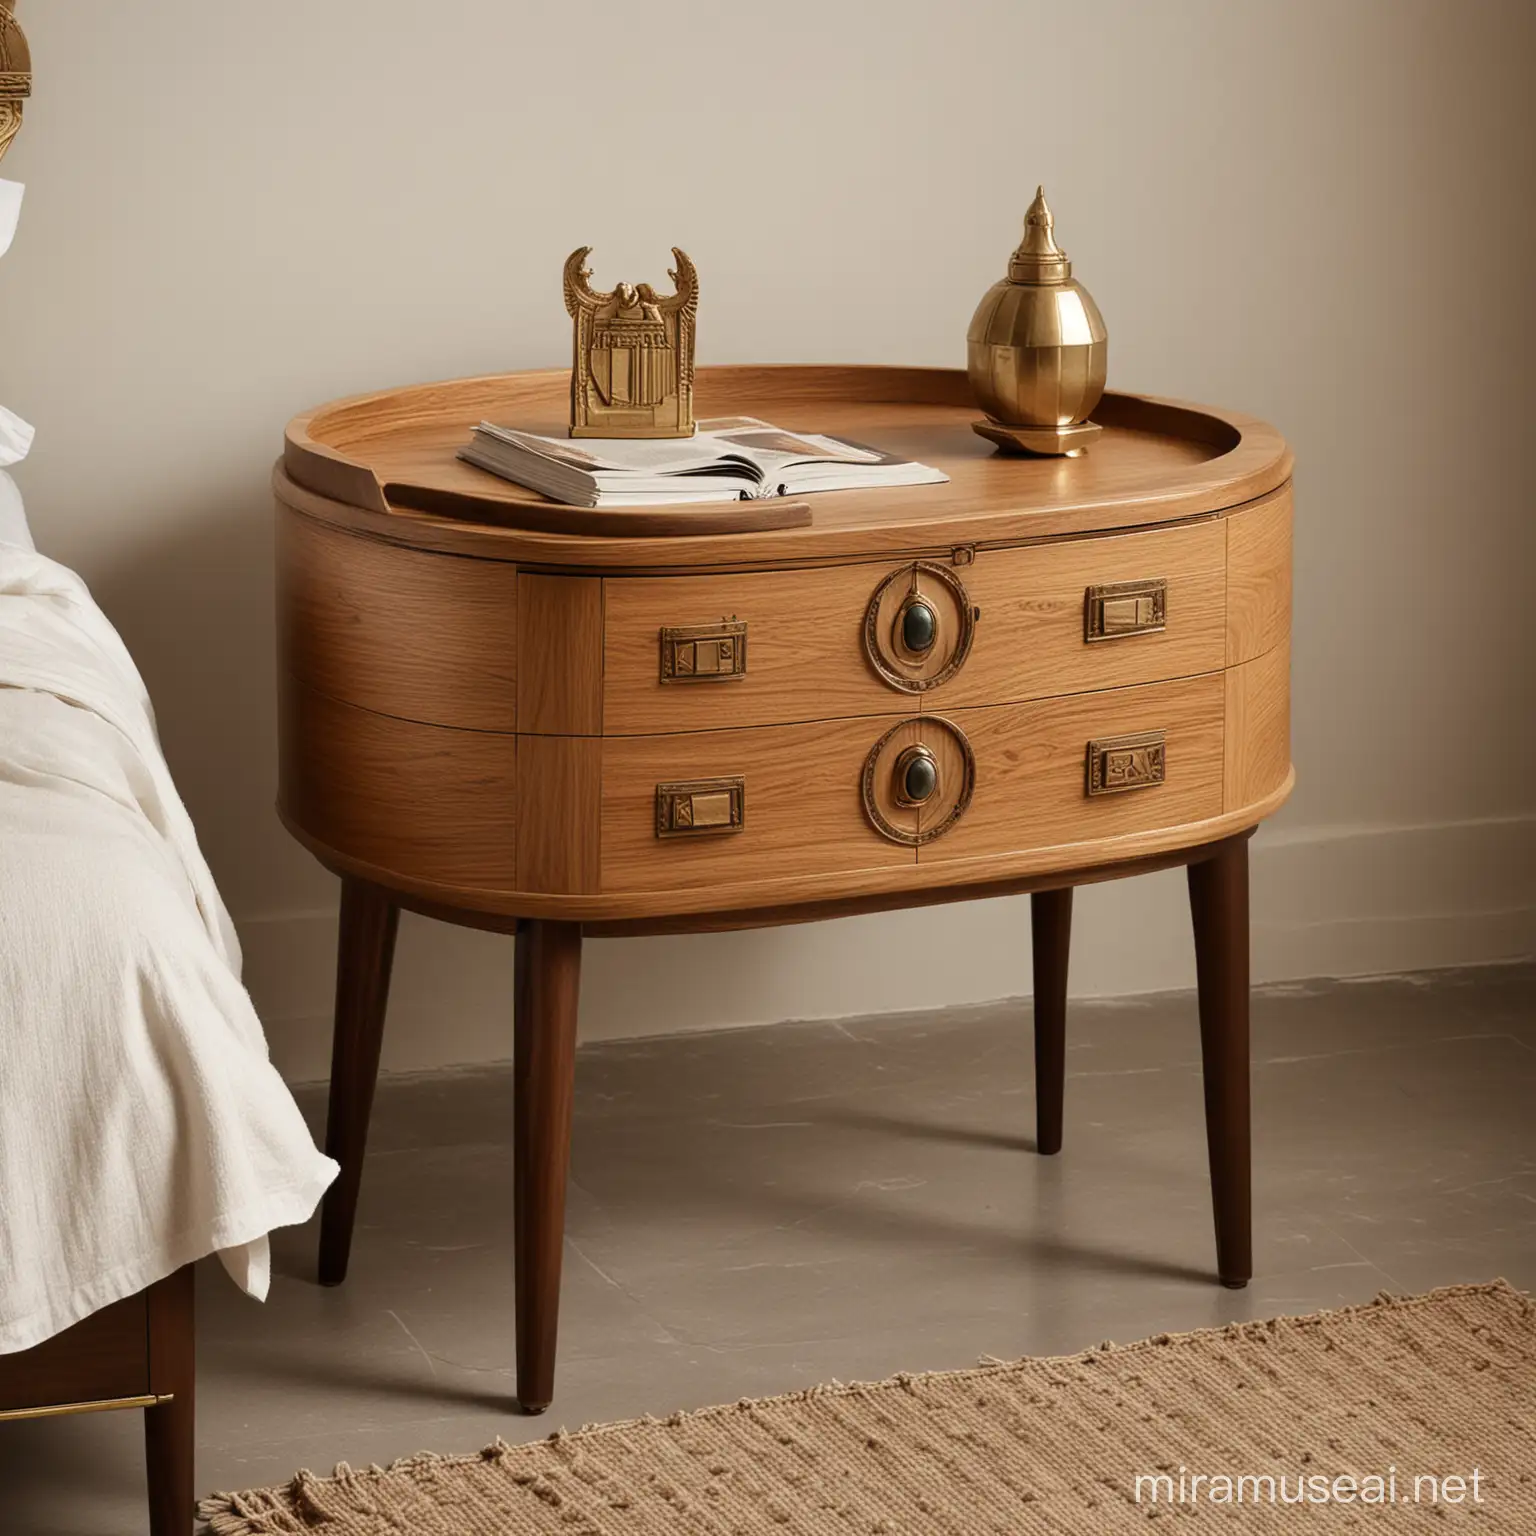 The bedside table, inspired by the ancient Egyptian, has the shape of a scarab and has two stairs